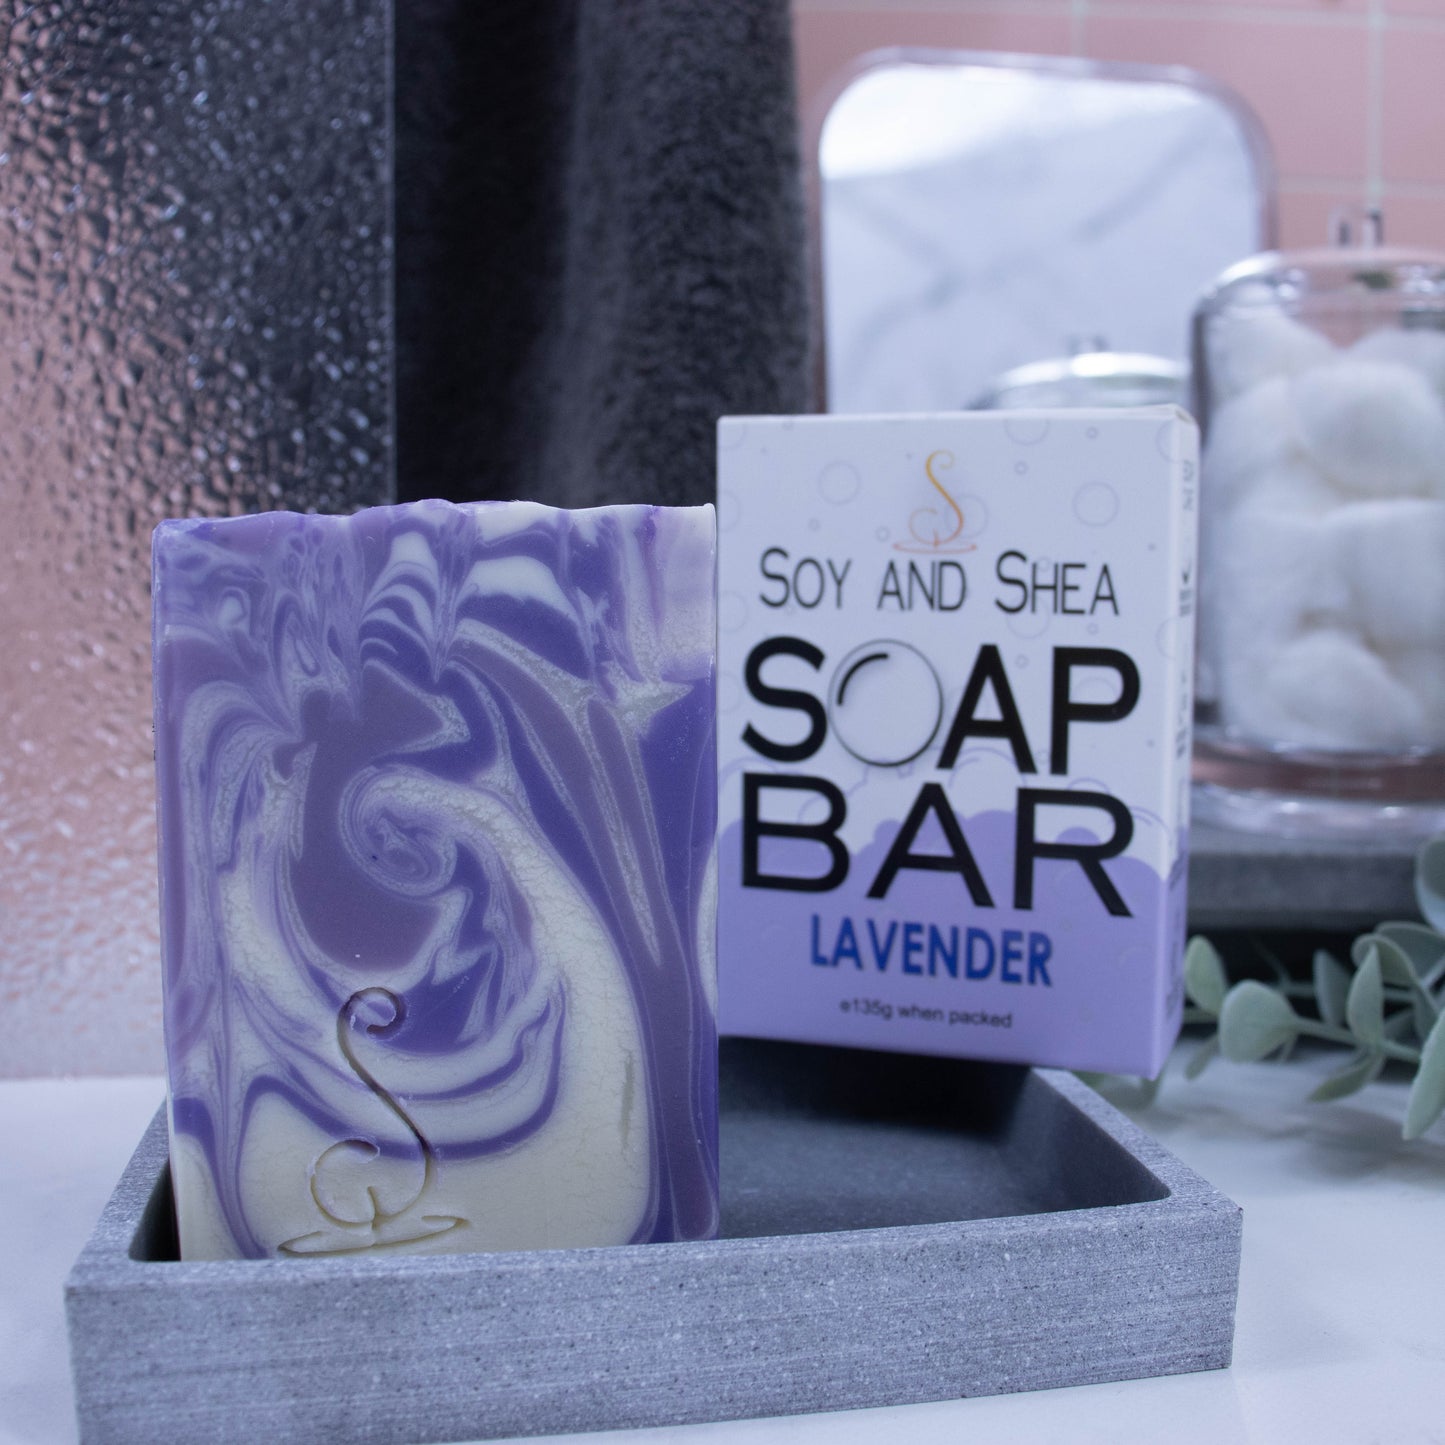 A close up look of the soap which has lavender, dark purple and white swirls.  The soap is rectangular in shape and is taller than wide.  It is sitting on a stone soap dish and behind it is the box the soap came in.  The lower portion of the box has a bubble border coloured in lavender whereas the top is white with small grey bubbles.  The box advises it is soap and the scent.